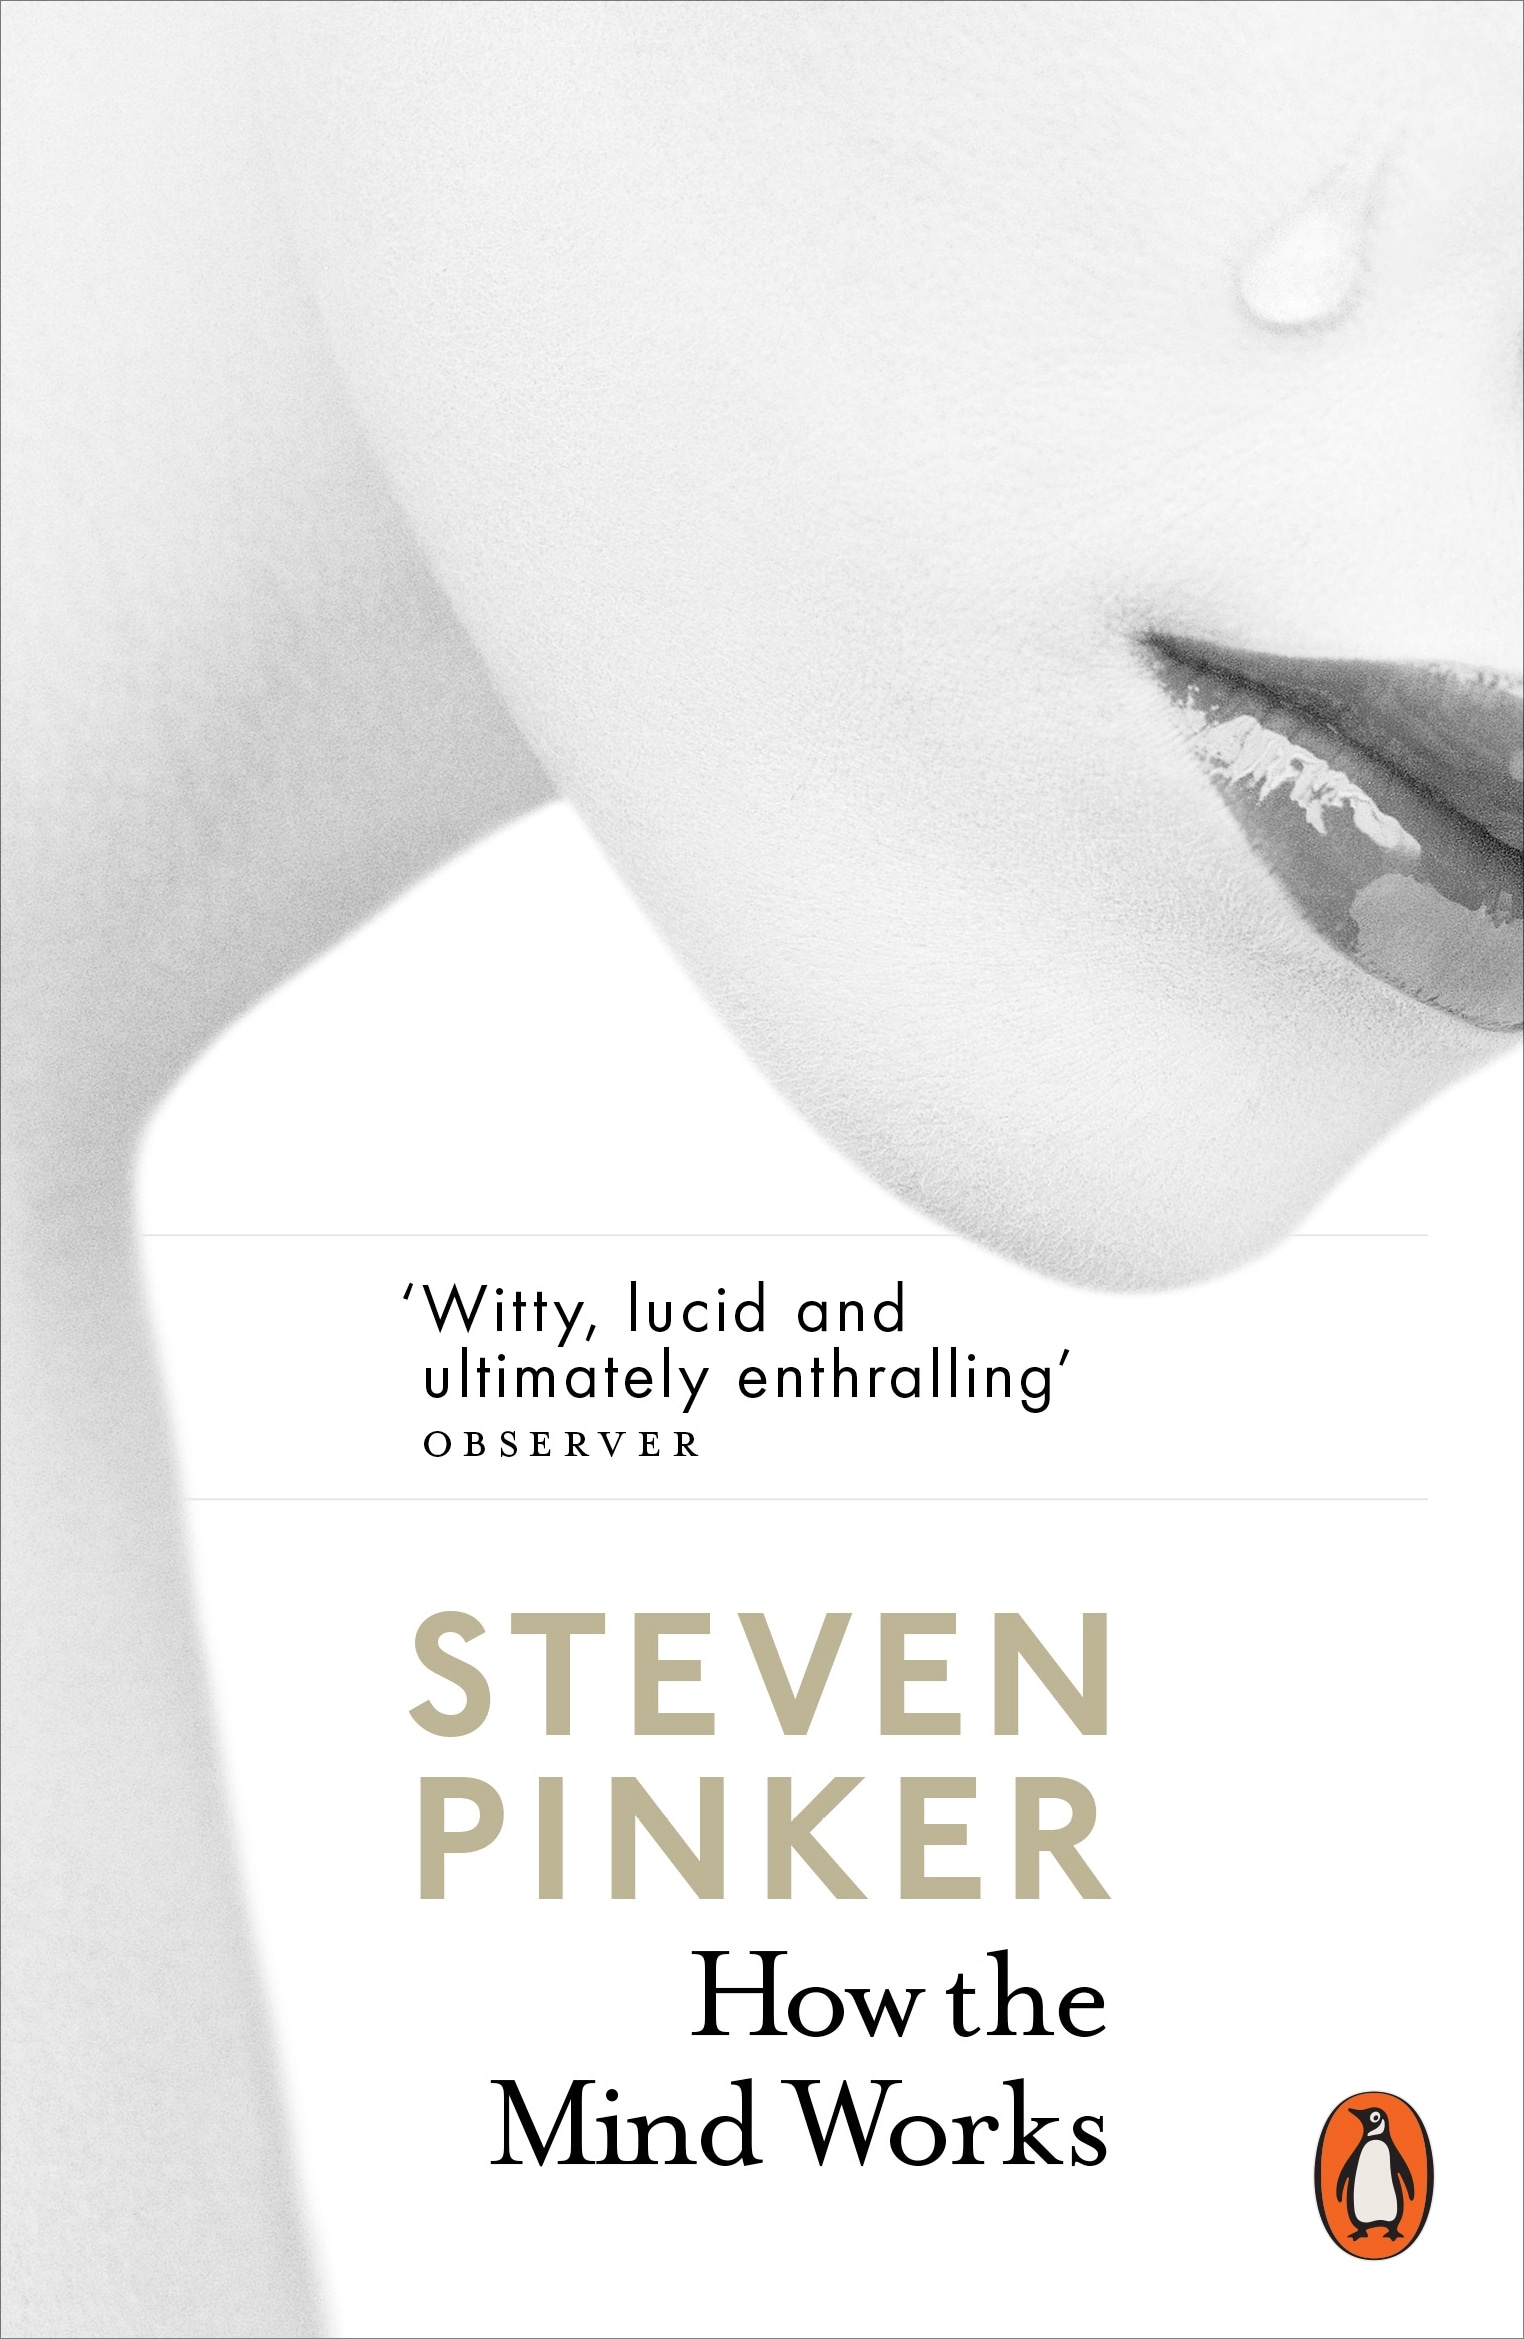 Book “How the Mind Works” by Steven Pinker — April 2, 2015